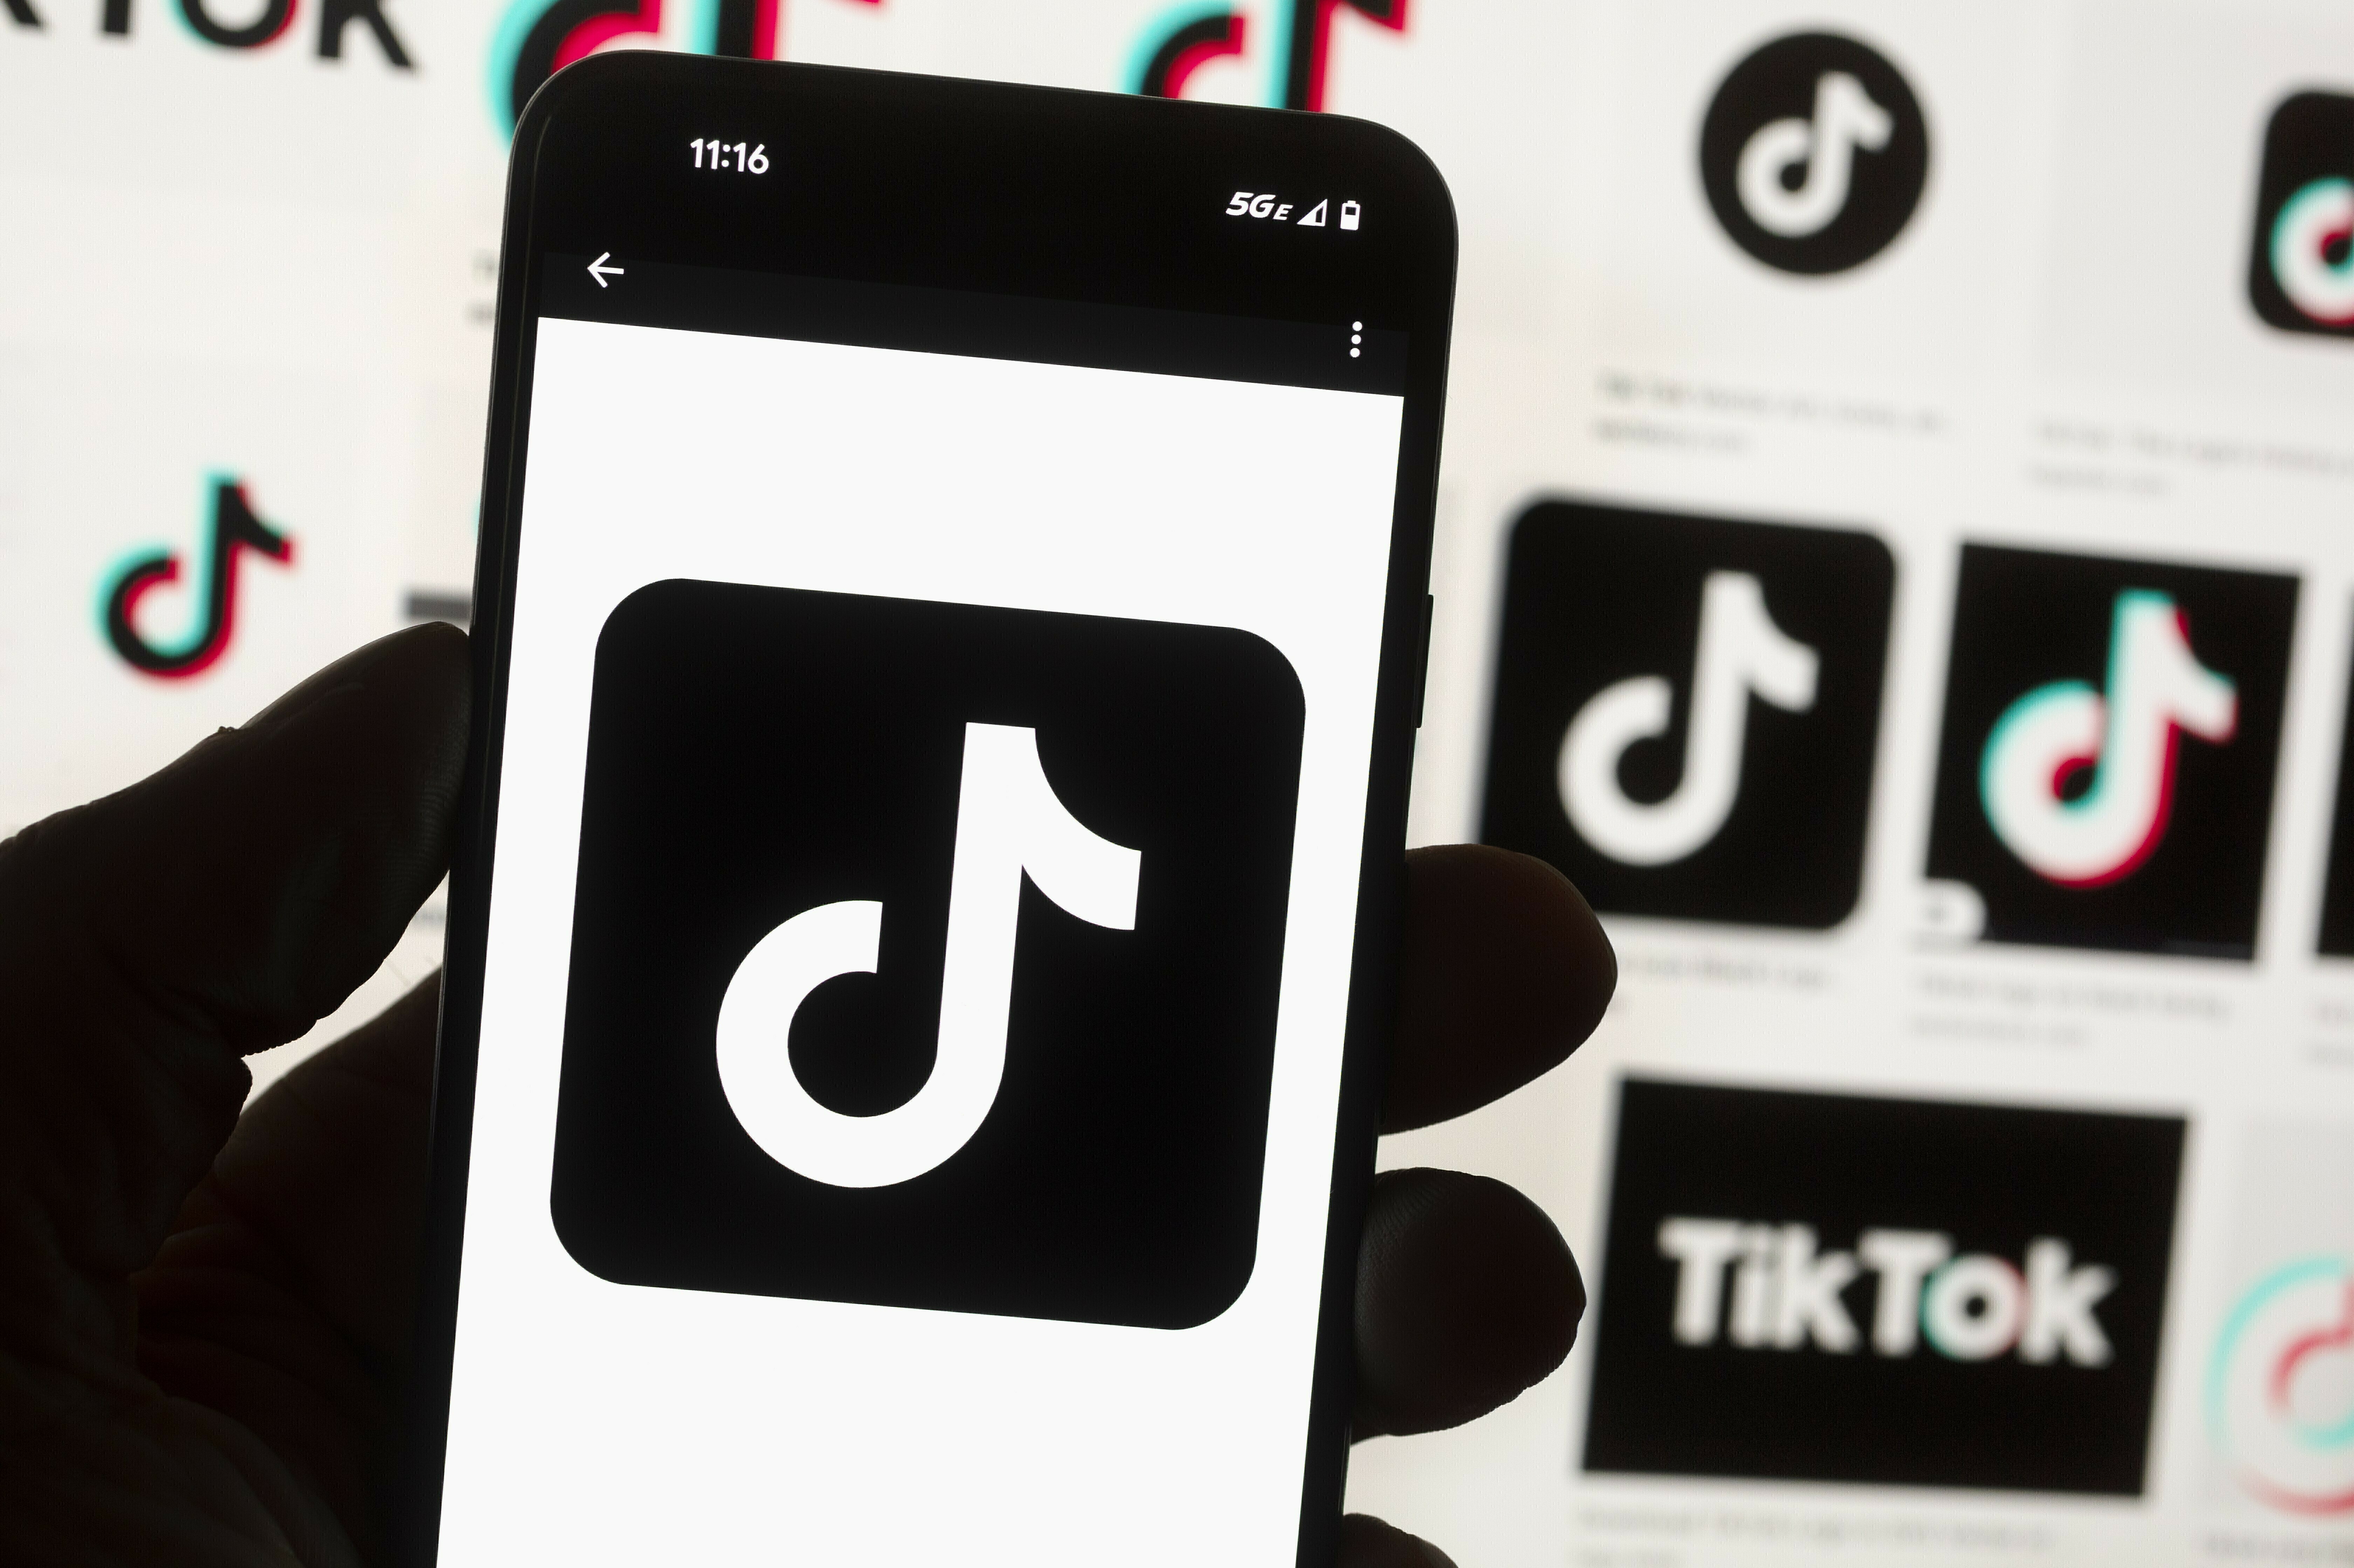 The U.S. Government Banned TikTok From Federal Devices. What's